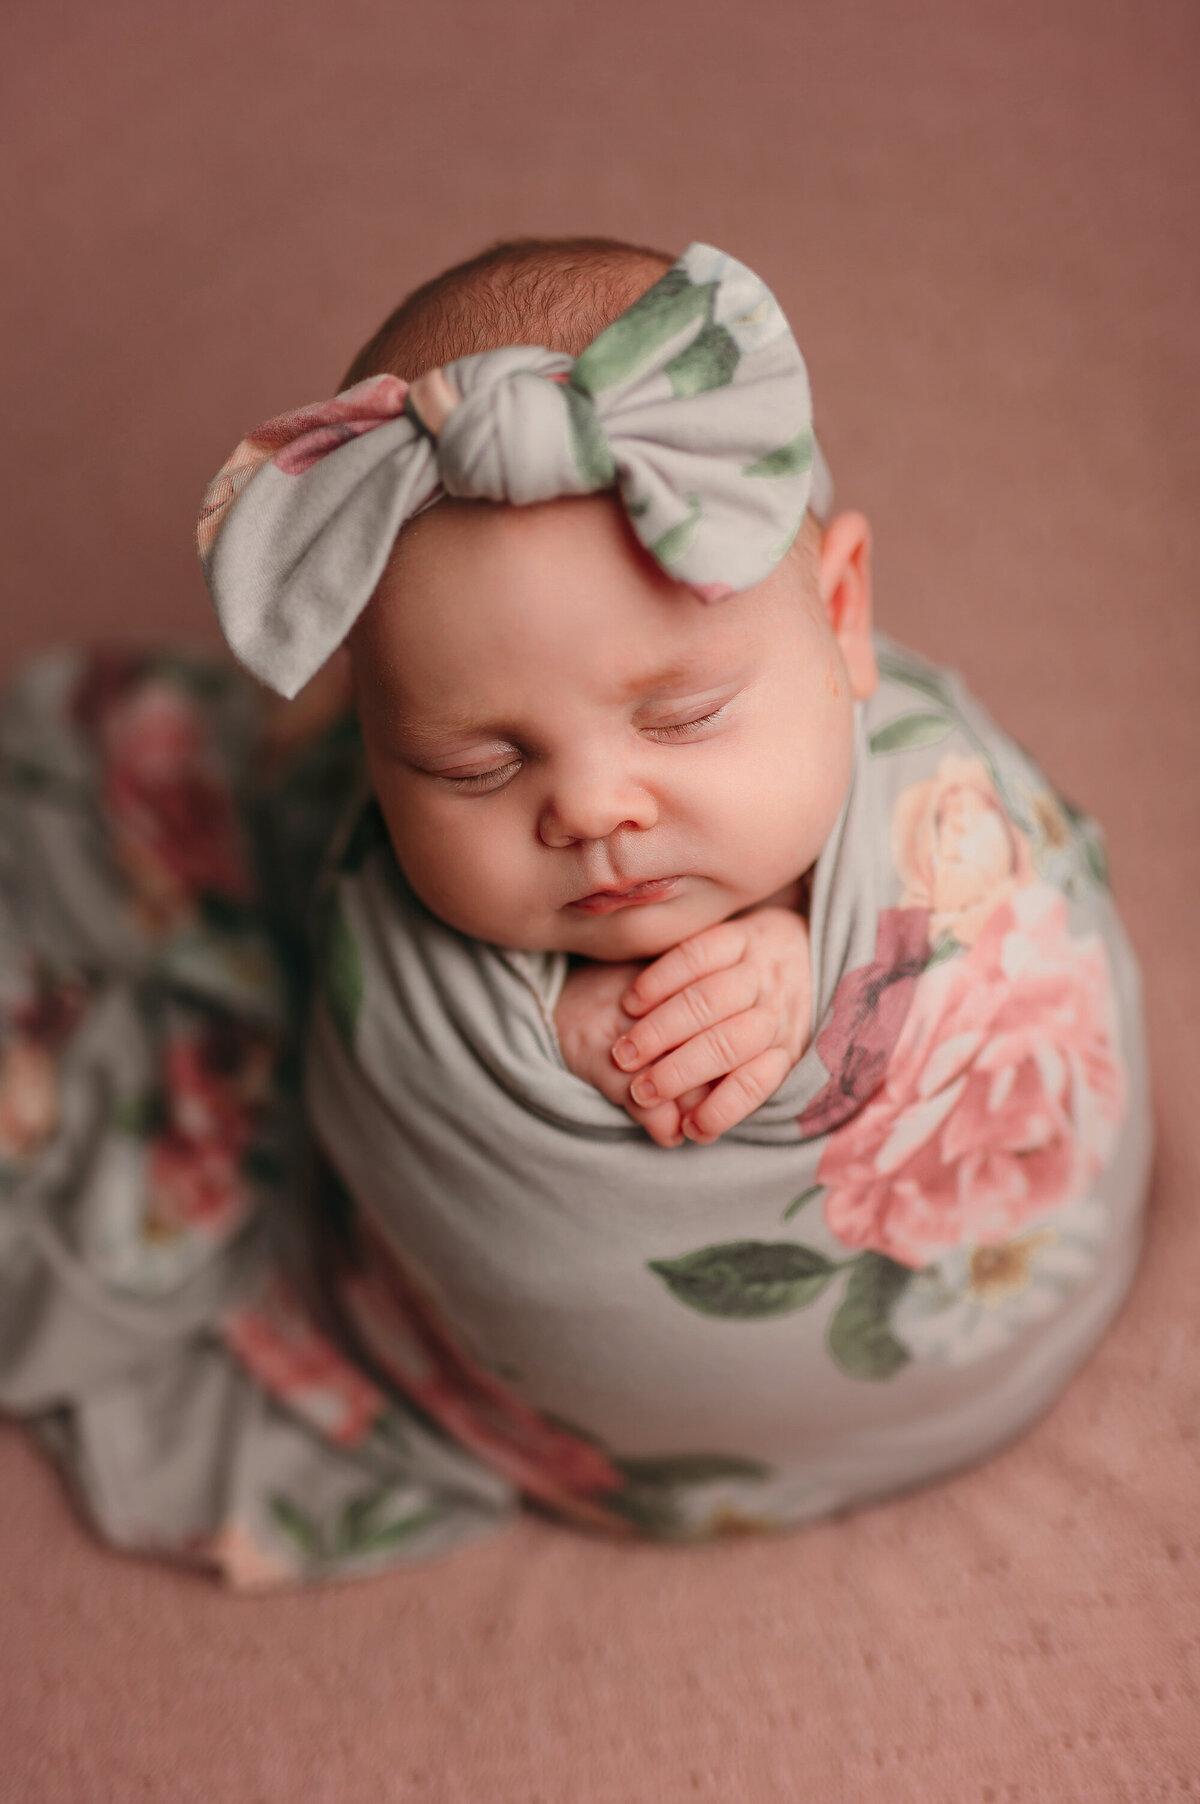 Portrait of baby girl swaddled  like a cocoon in a floral wrap with matching headband against a pink backdrop.